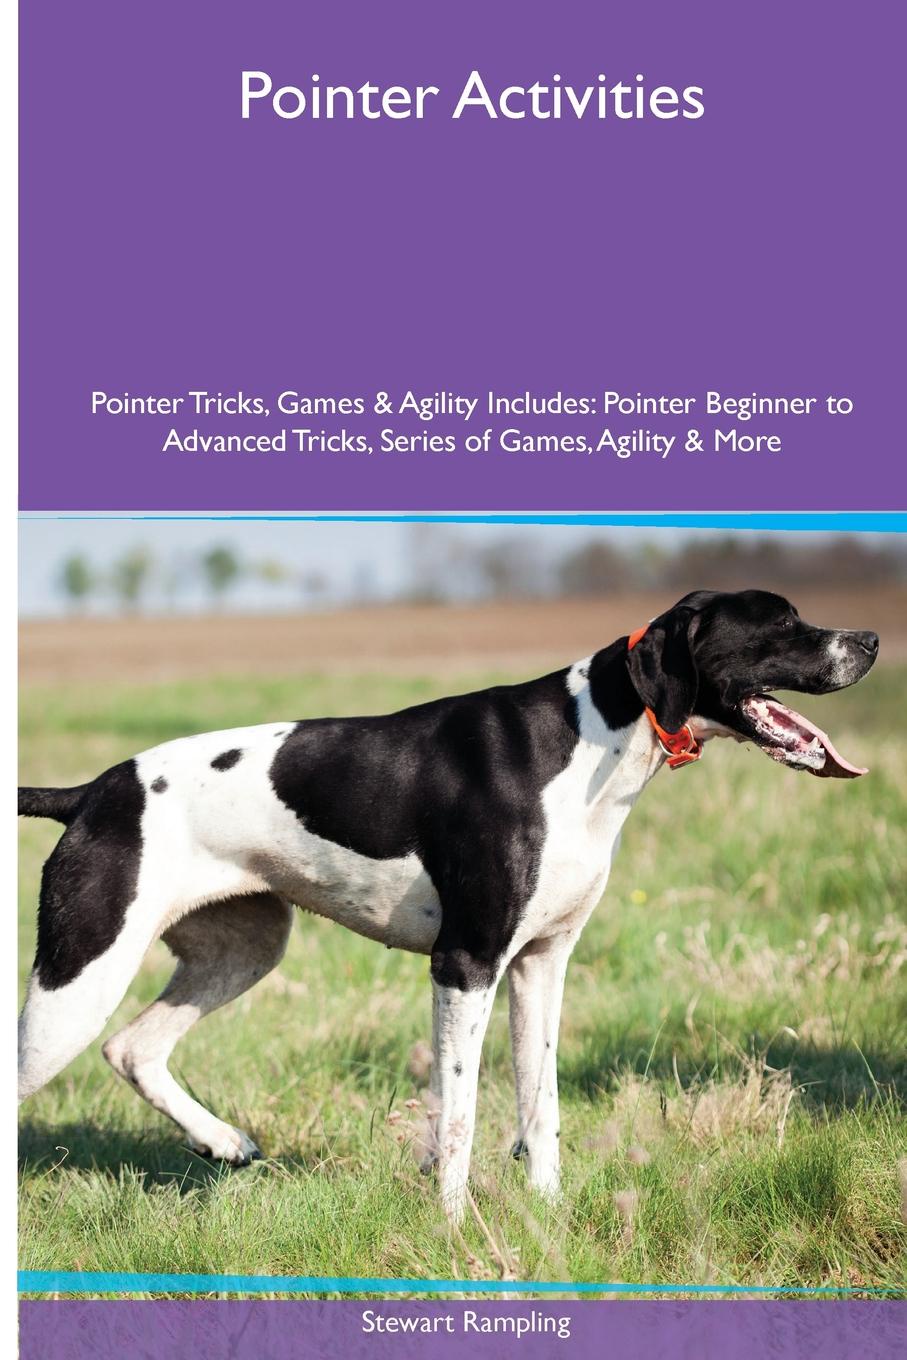 Pointer  Activities Pointer Tricks, Games & Agility. Includes. Pointer Beginner to Advanced Tricks, Series of Games, Agility and More